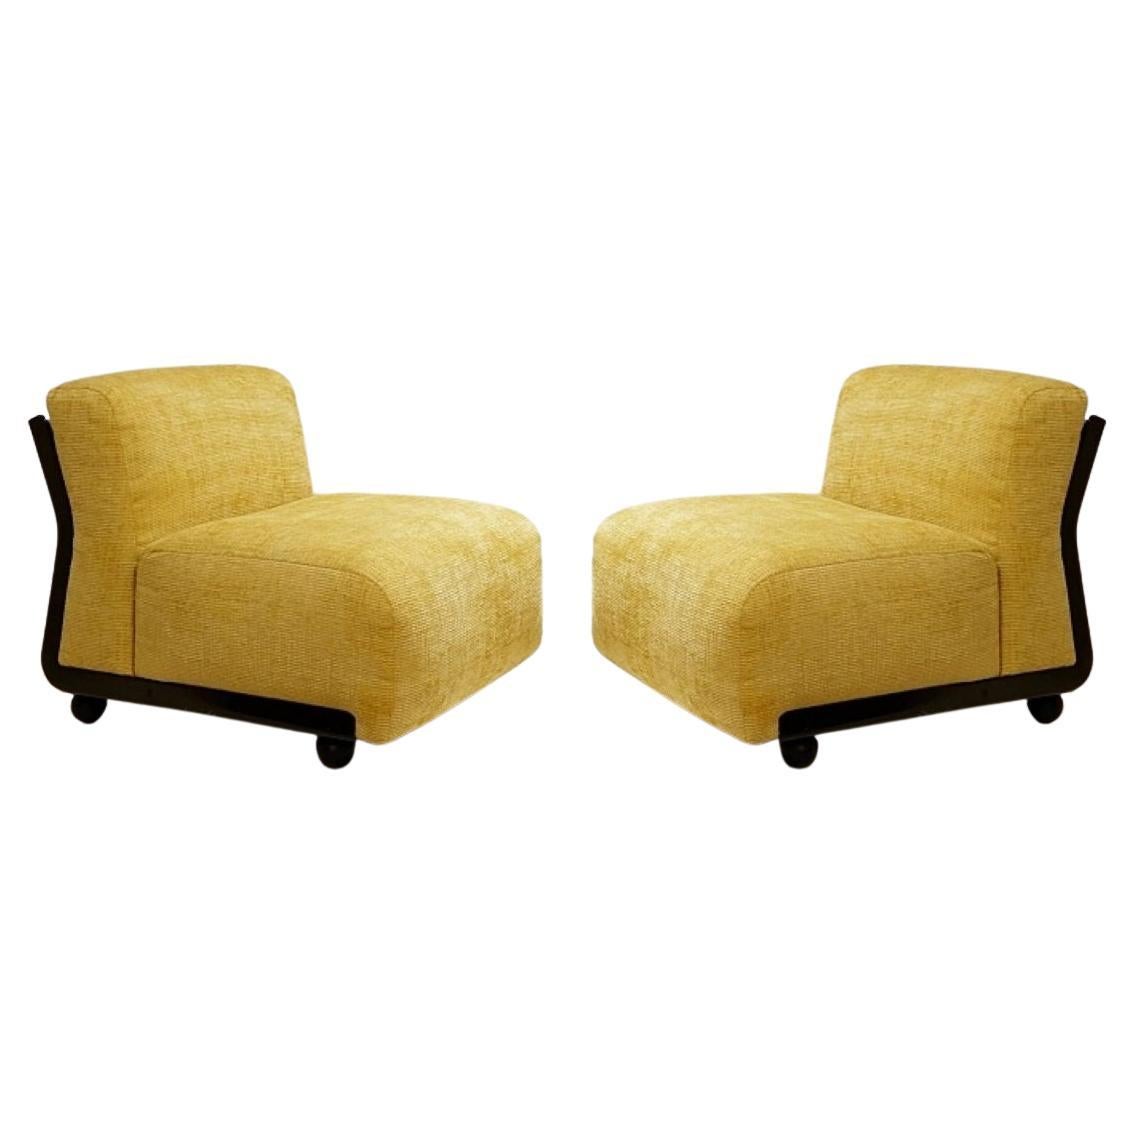 Mid-Century pair of "Amanta" Lounge chairs by Mario Bellini for C&B Italia, 1960